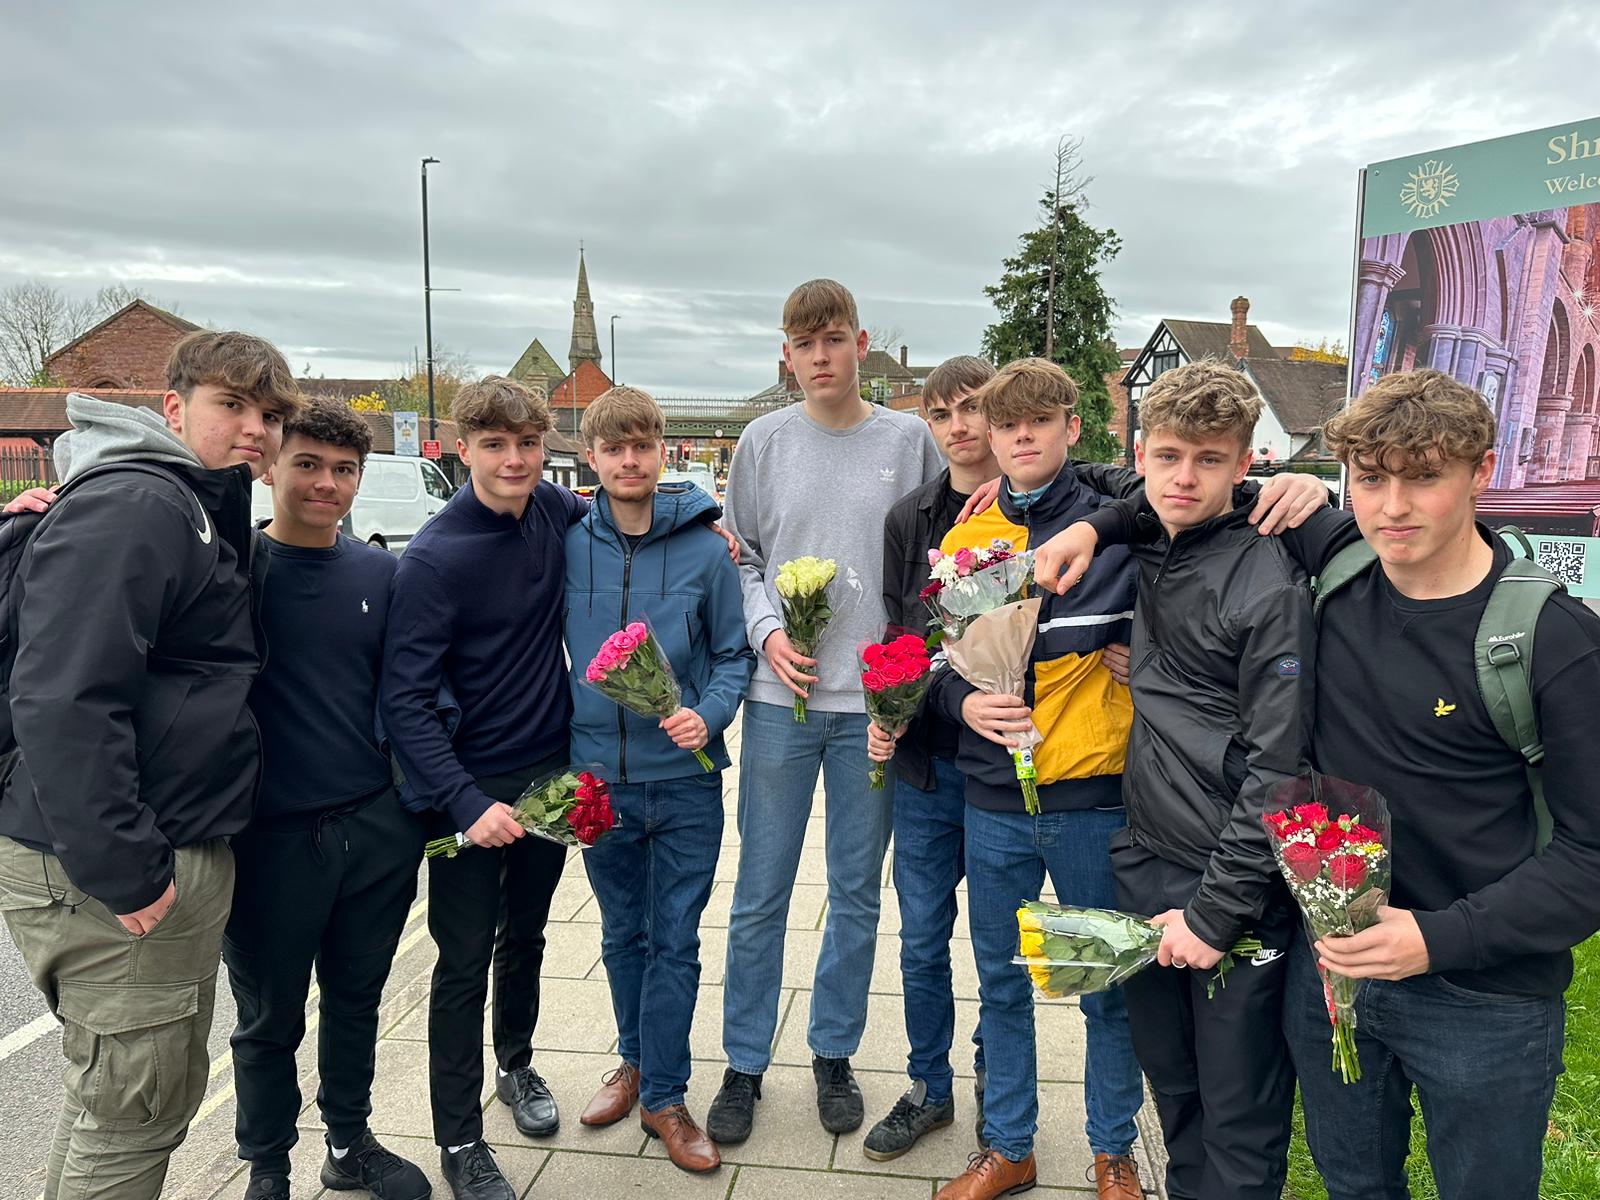 Friends of the four teenagers gathered at Shrewsbury Abbey on Tuesday to pay their respects.